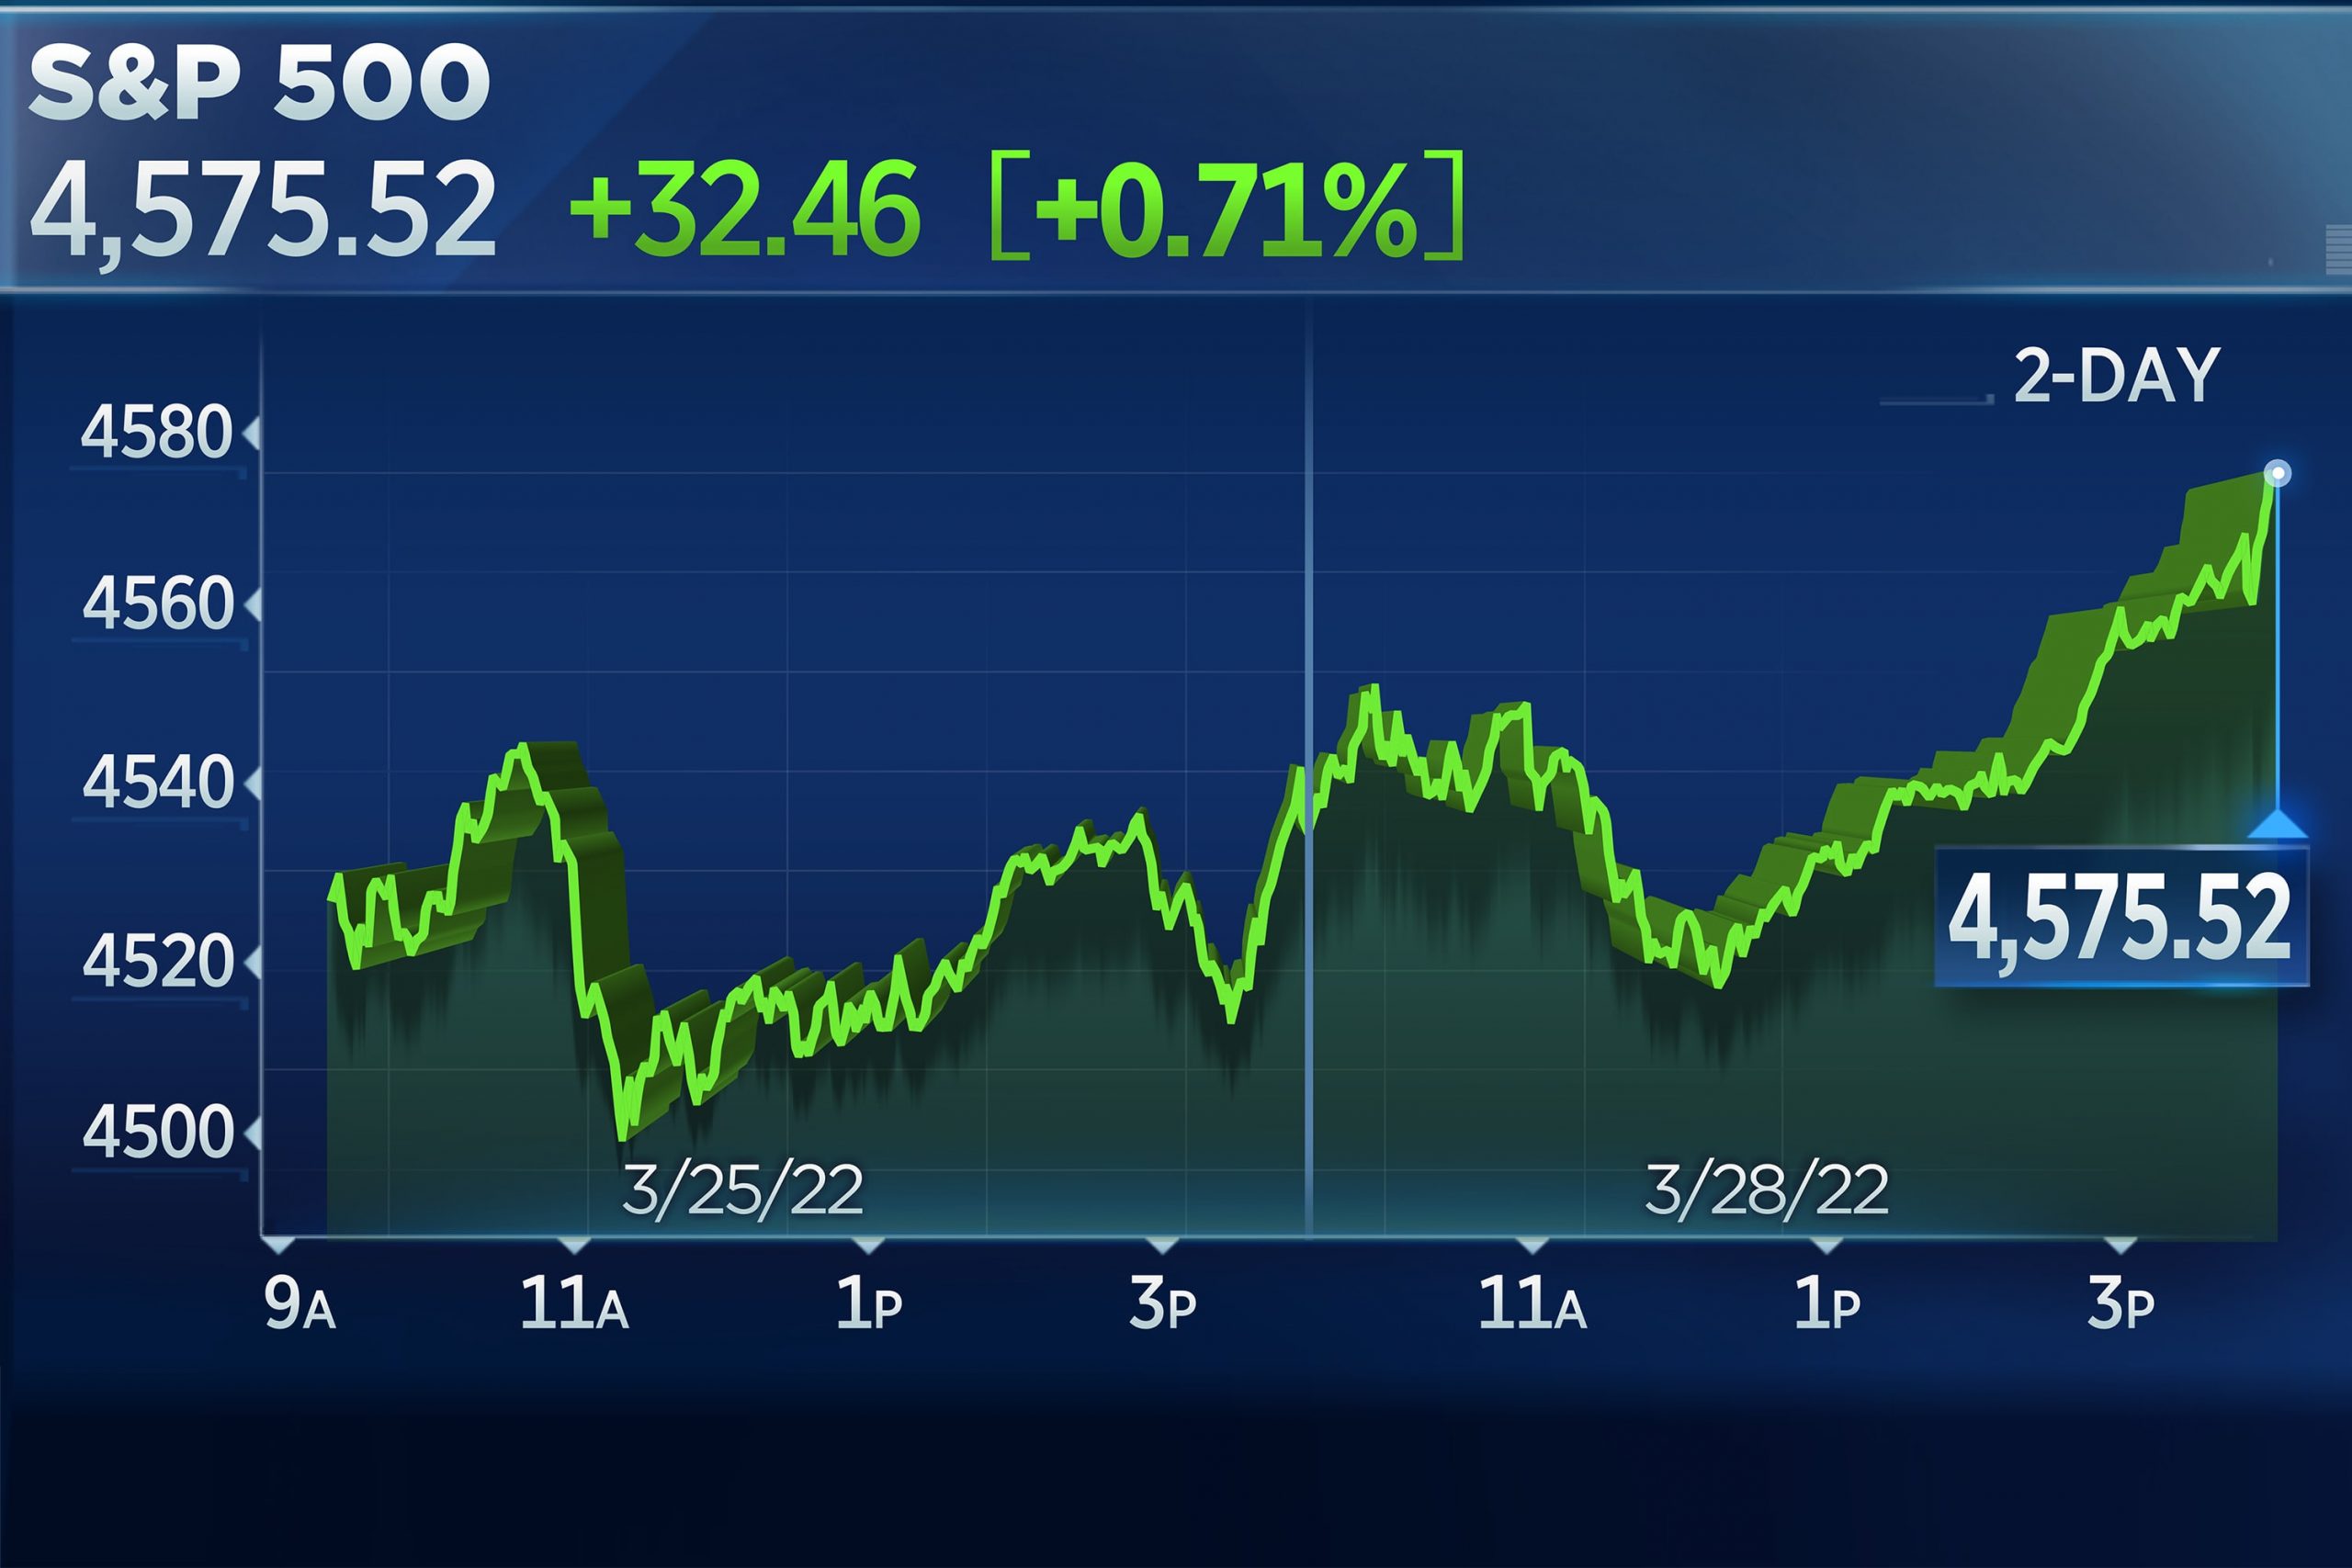 S&P 500 rises on Monday to extend two-week comeback, Nasdaq adds 1% on tech rally